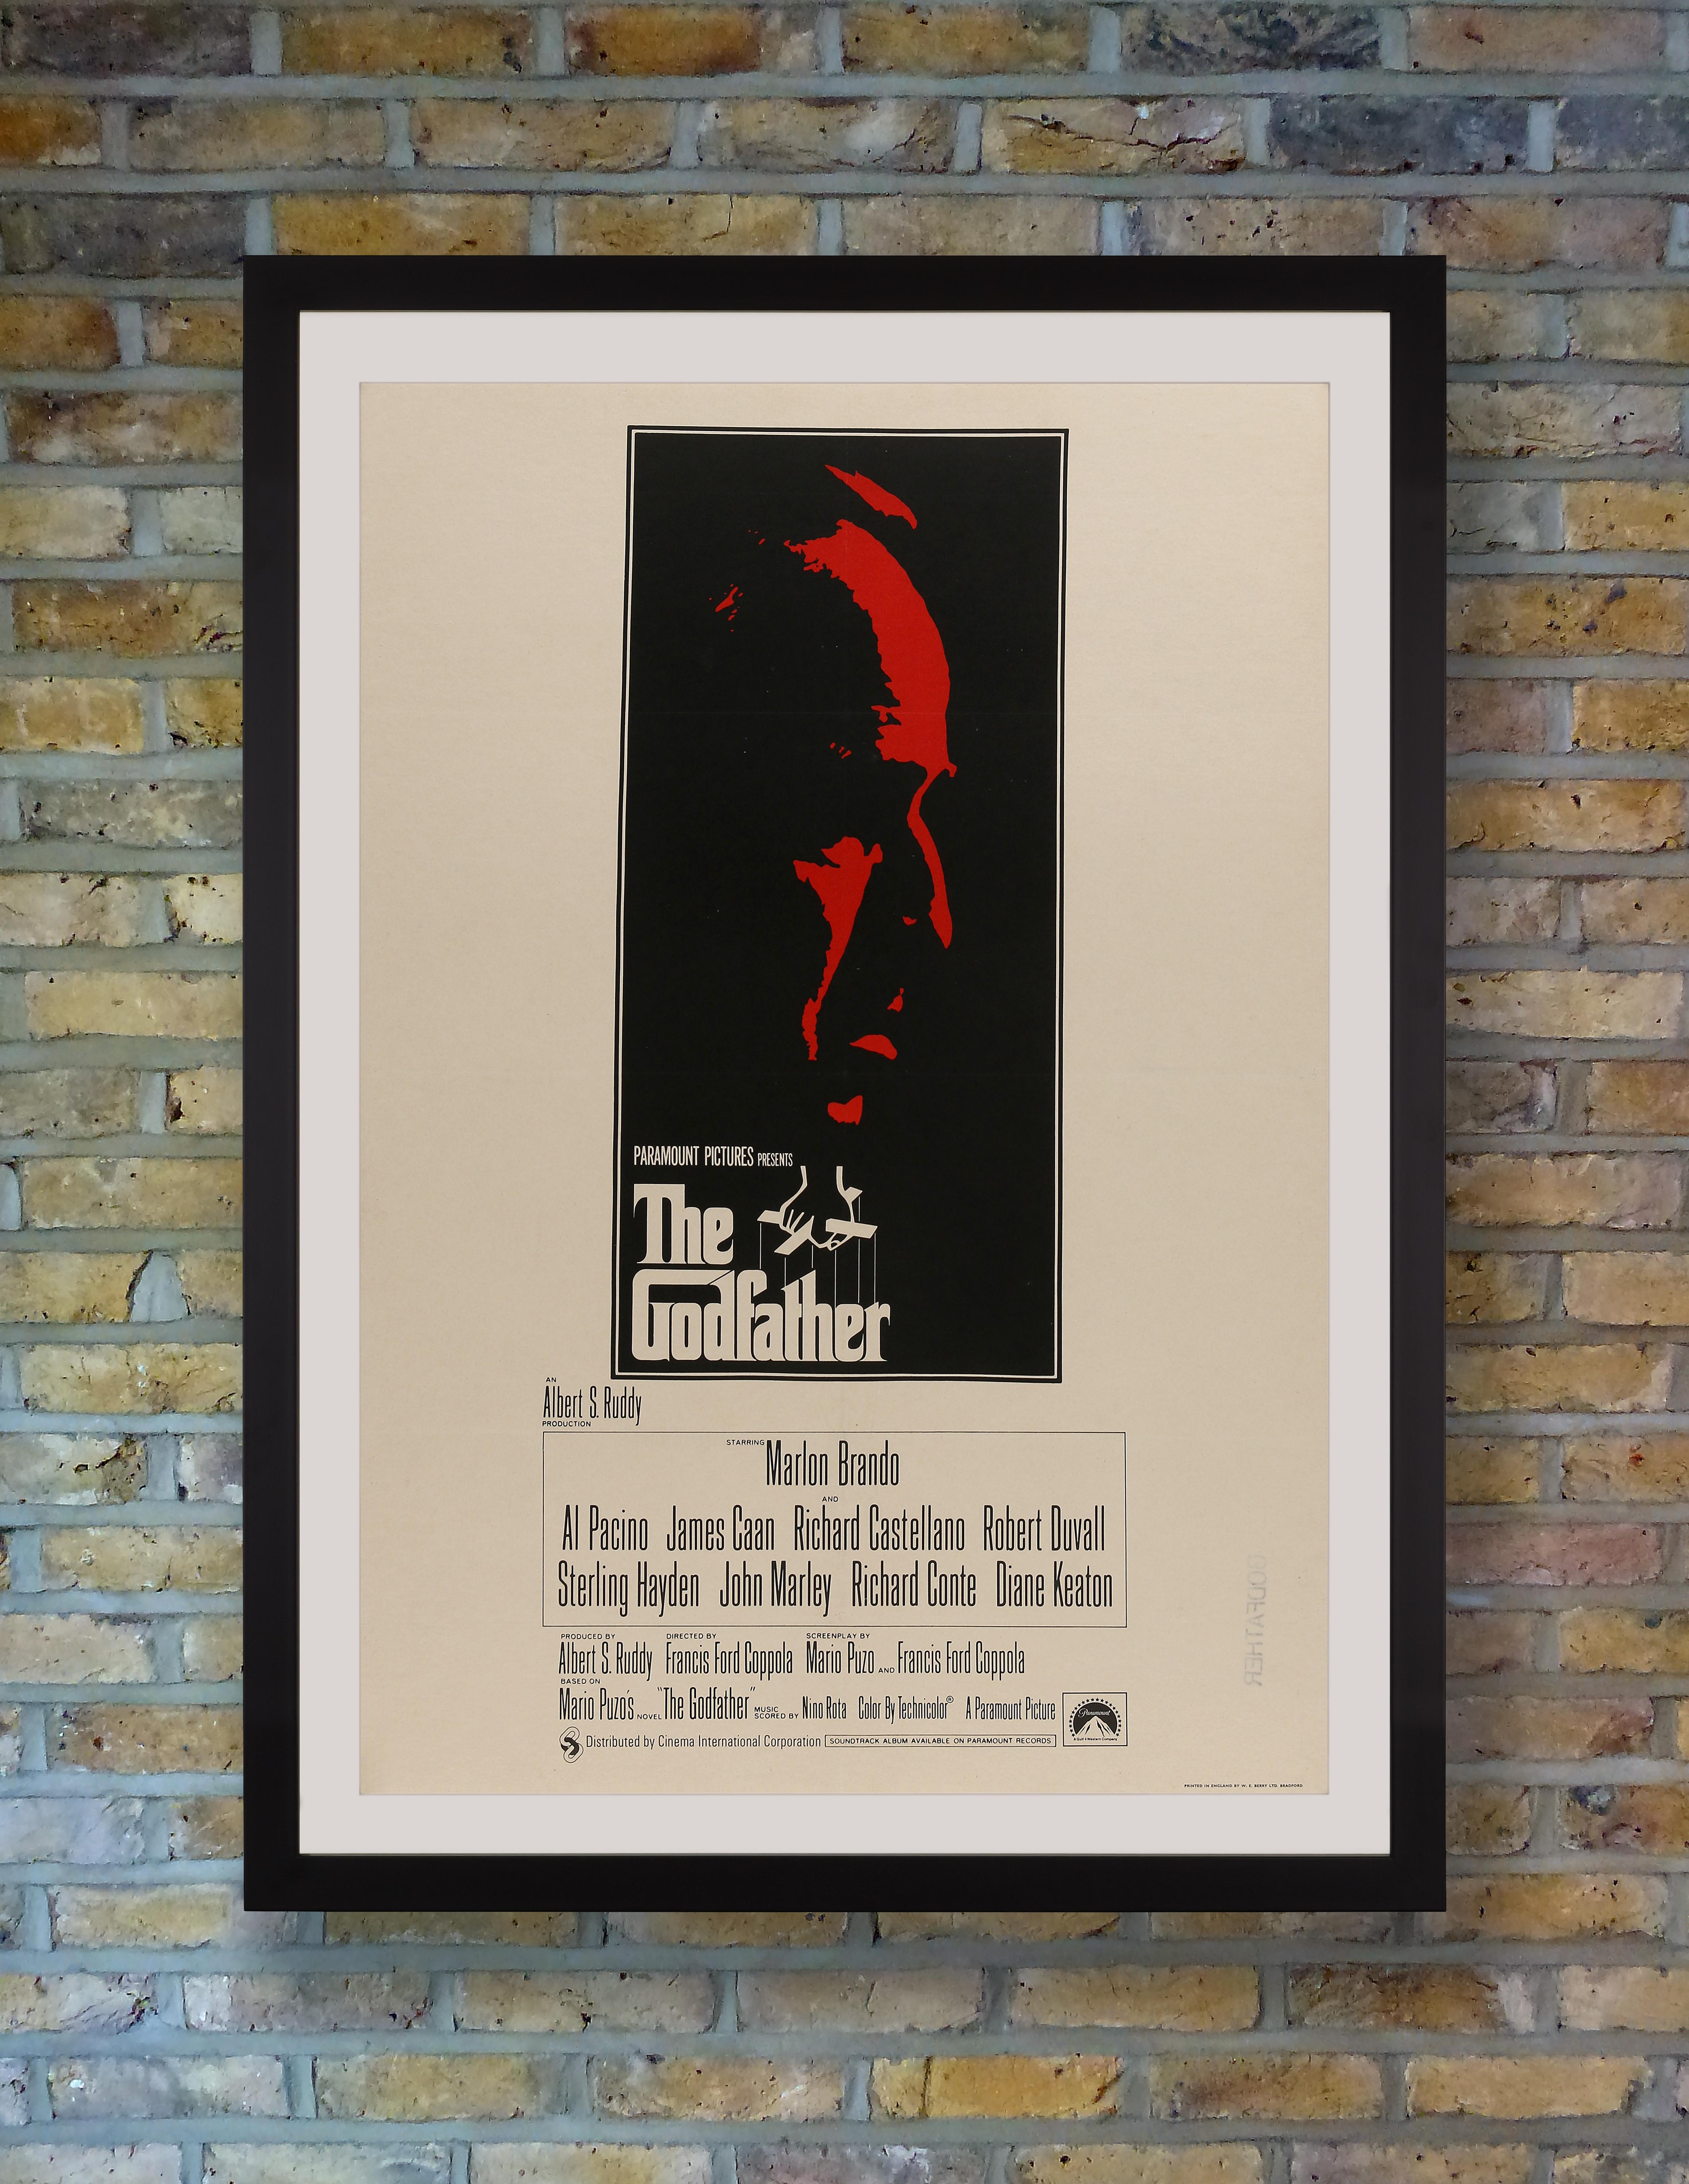 British One Sheet
Backed on linen
Art by S. Neil Fujita
Printed in England by W.E. Berry Ltd. Bradford

Widely celebrated as one of the best and most influential movies of all time, Francis Ford Coppola's 1972 mafia masterpiece 'The Godfather,'